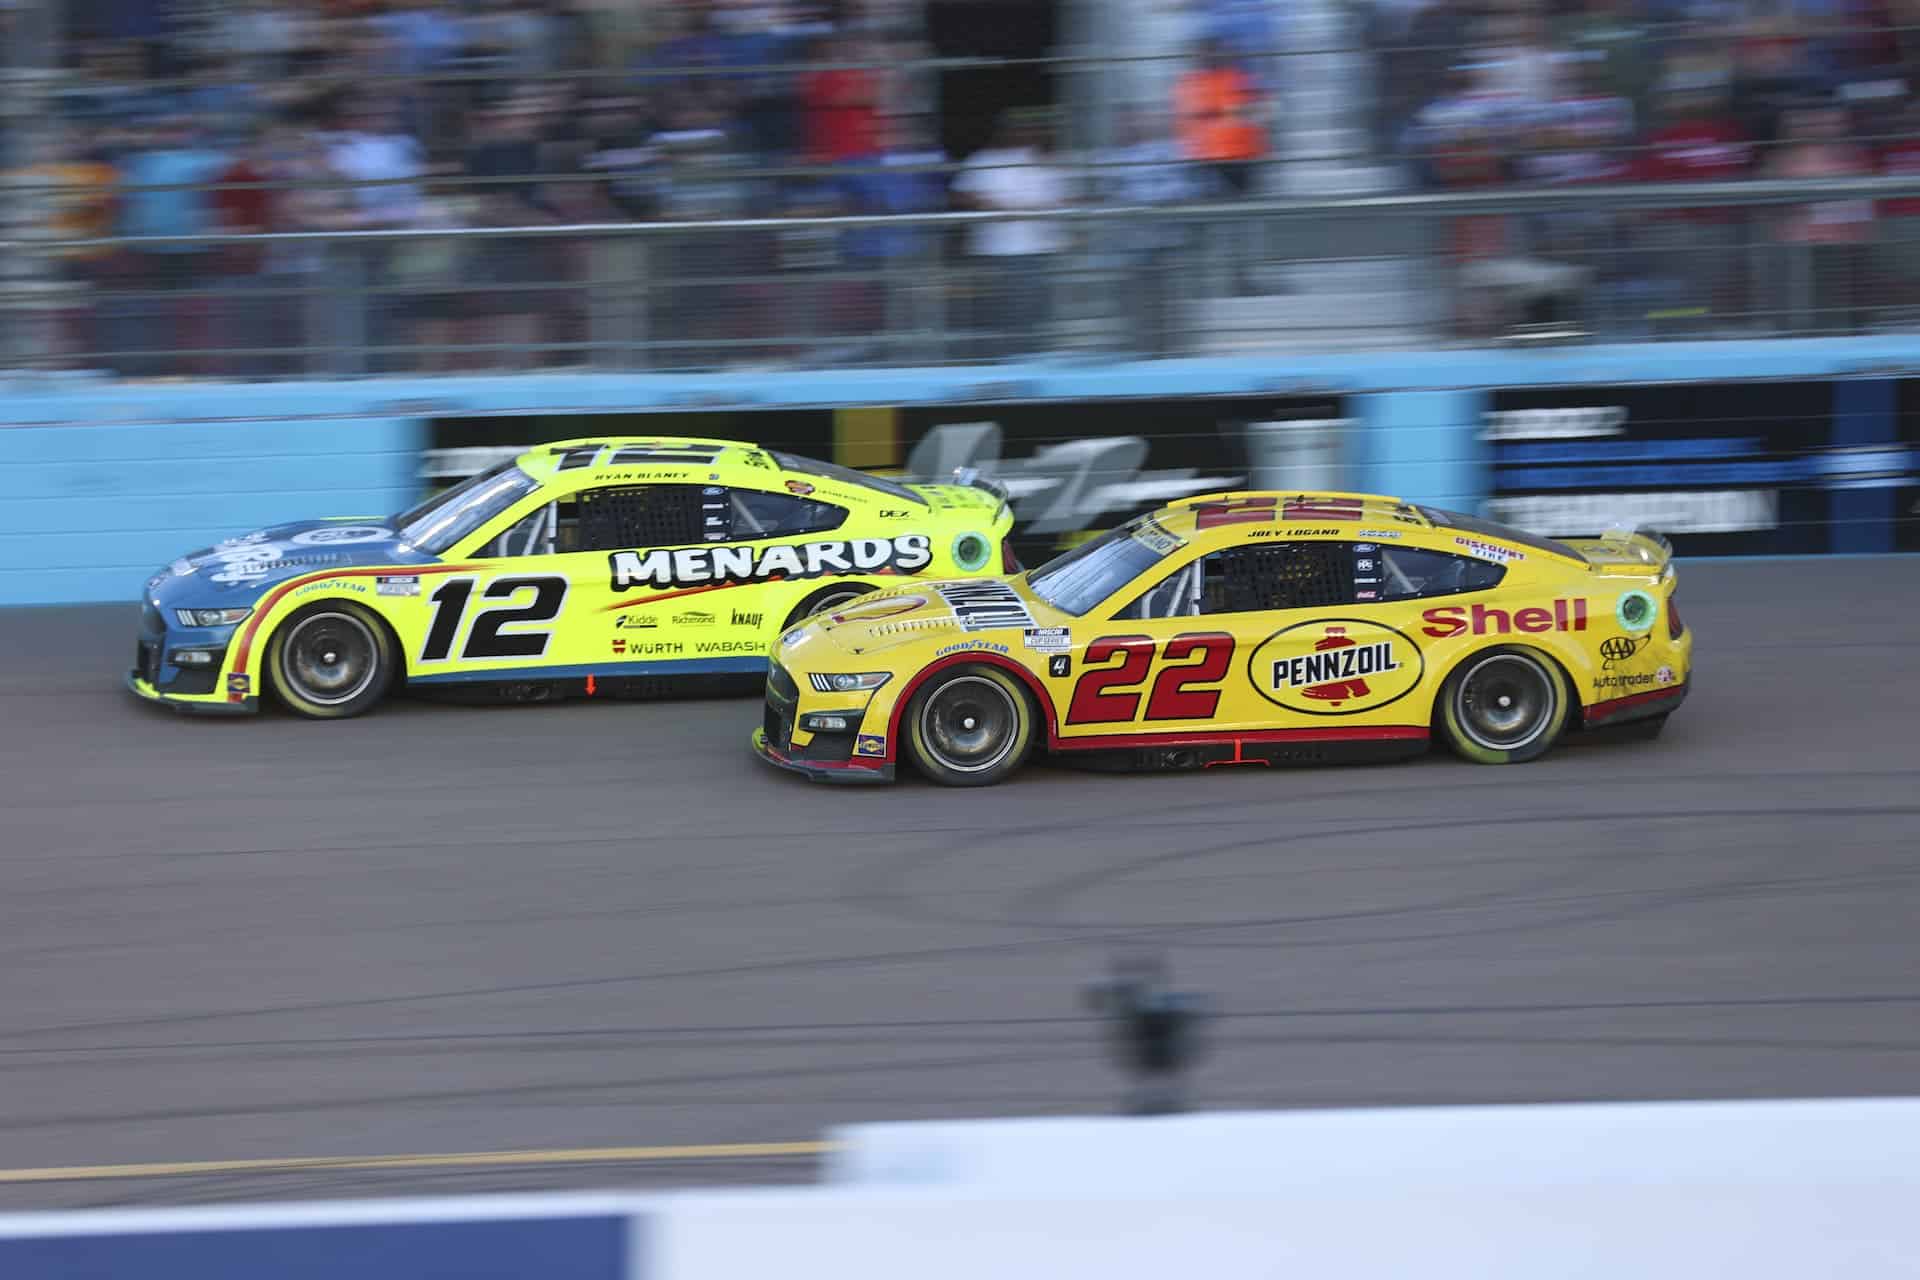 Ryan Blaney tries to edge out teammate Joey Logano for the win at Phoenix Raceway. Photo by Rachel Schuoler / Kickin' the Tires.